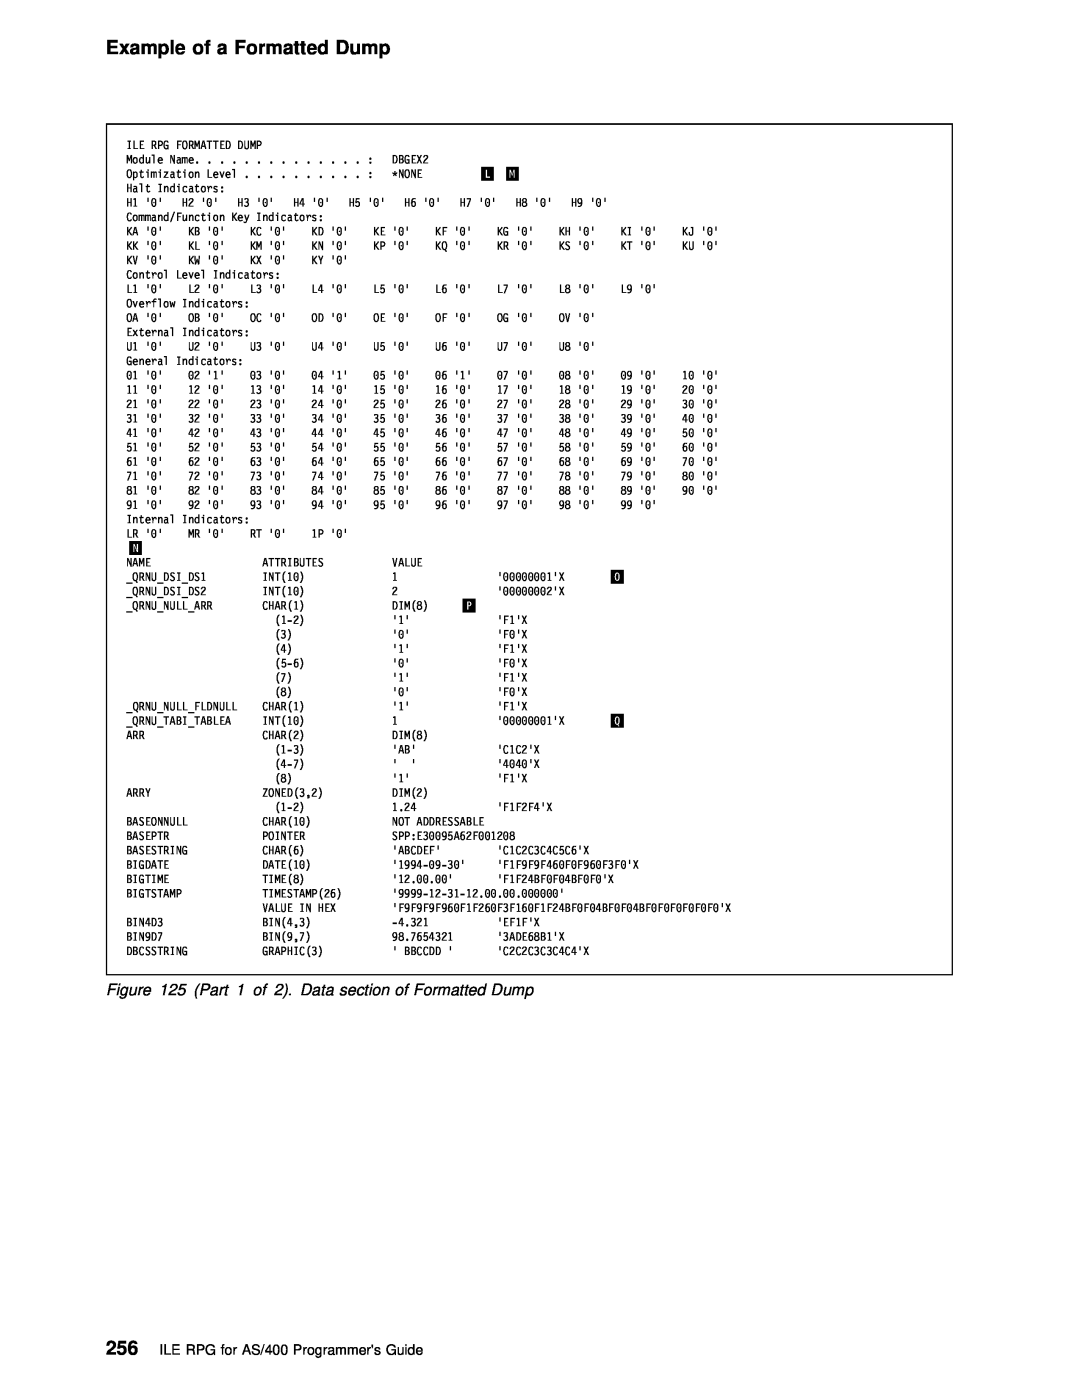 IBM Example of a Formatted Dump, Part 1 of 2. Data section of Formatted Dump, ILE RPG for AS/400 Programmers Guide 